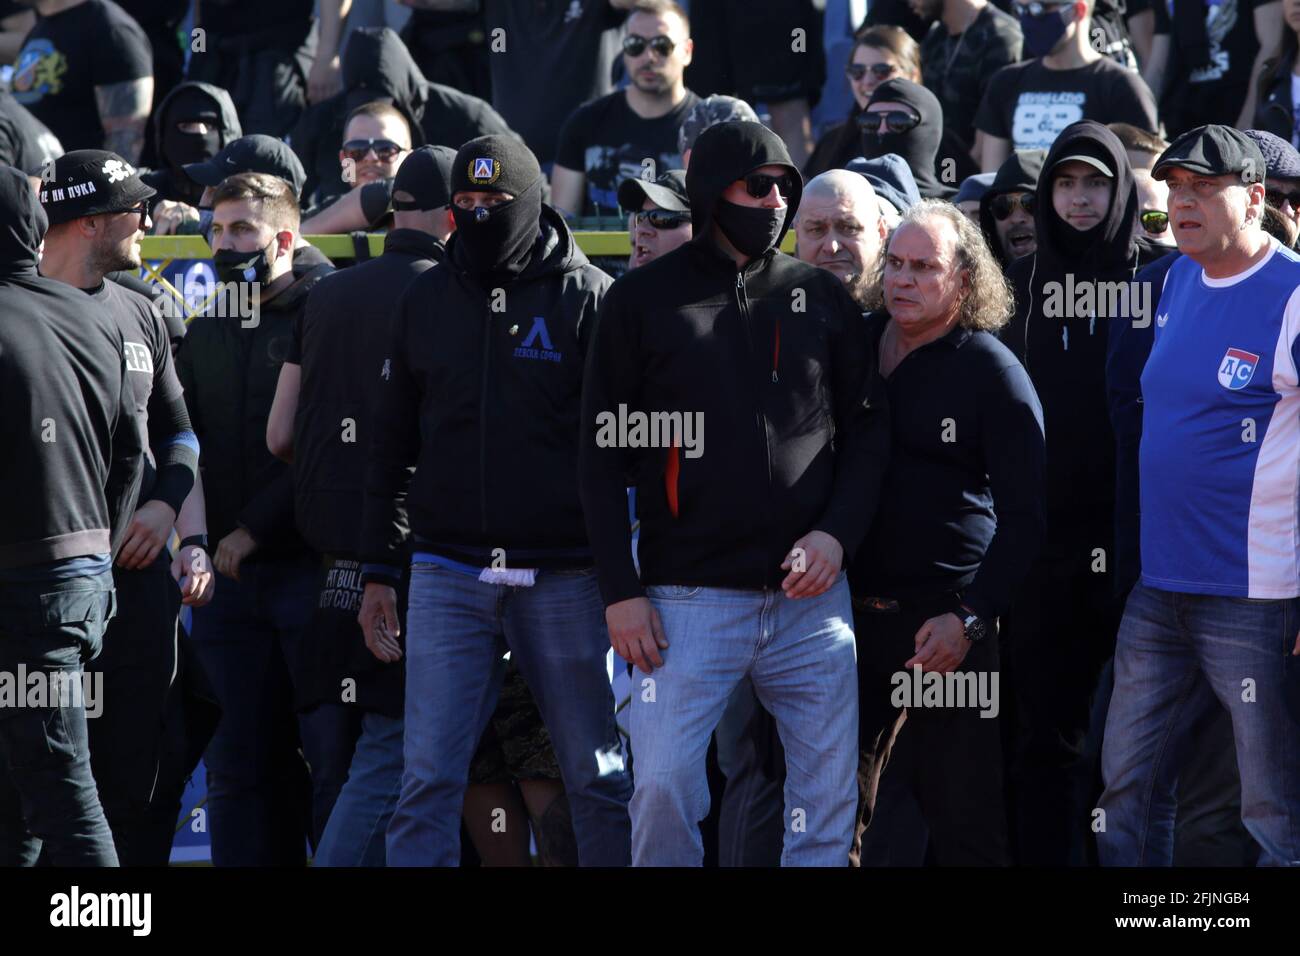 Sofia, Bulgaria: 25 April, 2021: Levski's supporters enter the stadium's track during the national championship football match between Levski and CSKA Sofia. Football fans have been allowed to attend the stadium with less than 30% of the seats amidst the coronavirus pandemic. Credit: Pluto/Alamy Live News Stock Photo